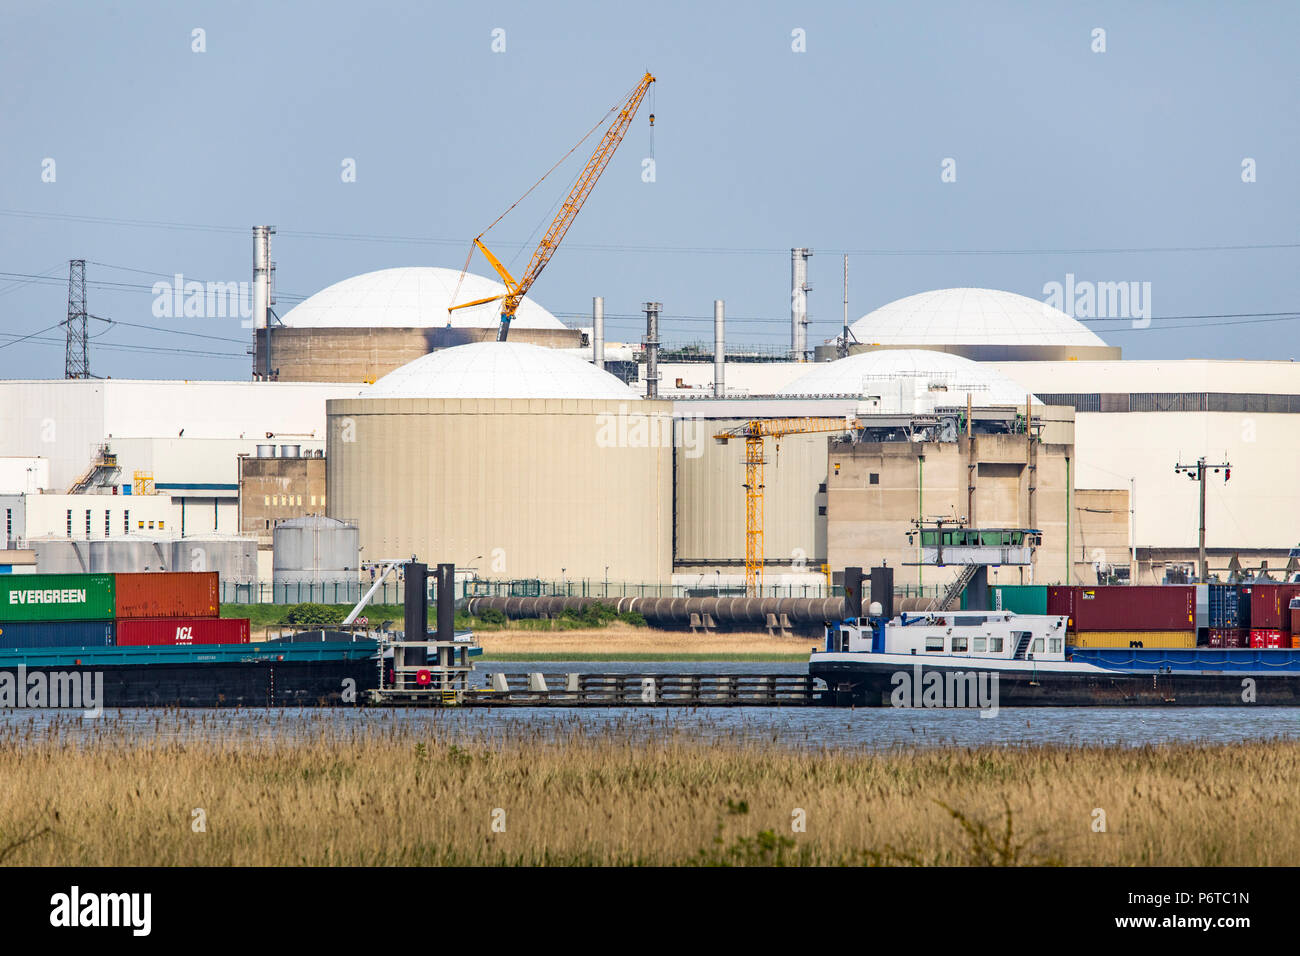 The Belgian nuclear power plant Doel, near Antwerp, on the Scheldt, nuclear power plant with 4 power plant units, with pressurized water reactors, ope Stock Photo